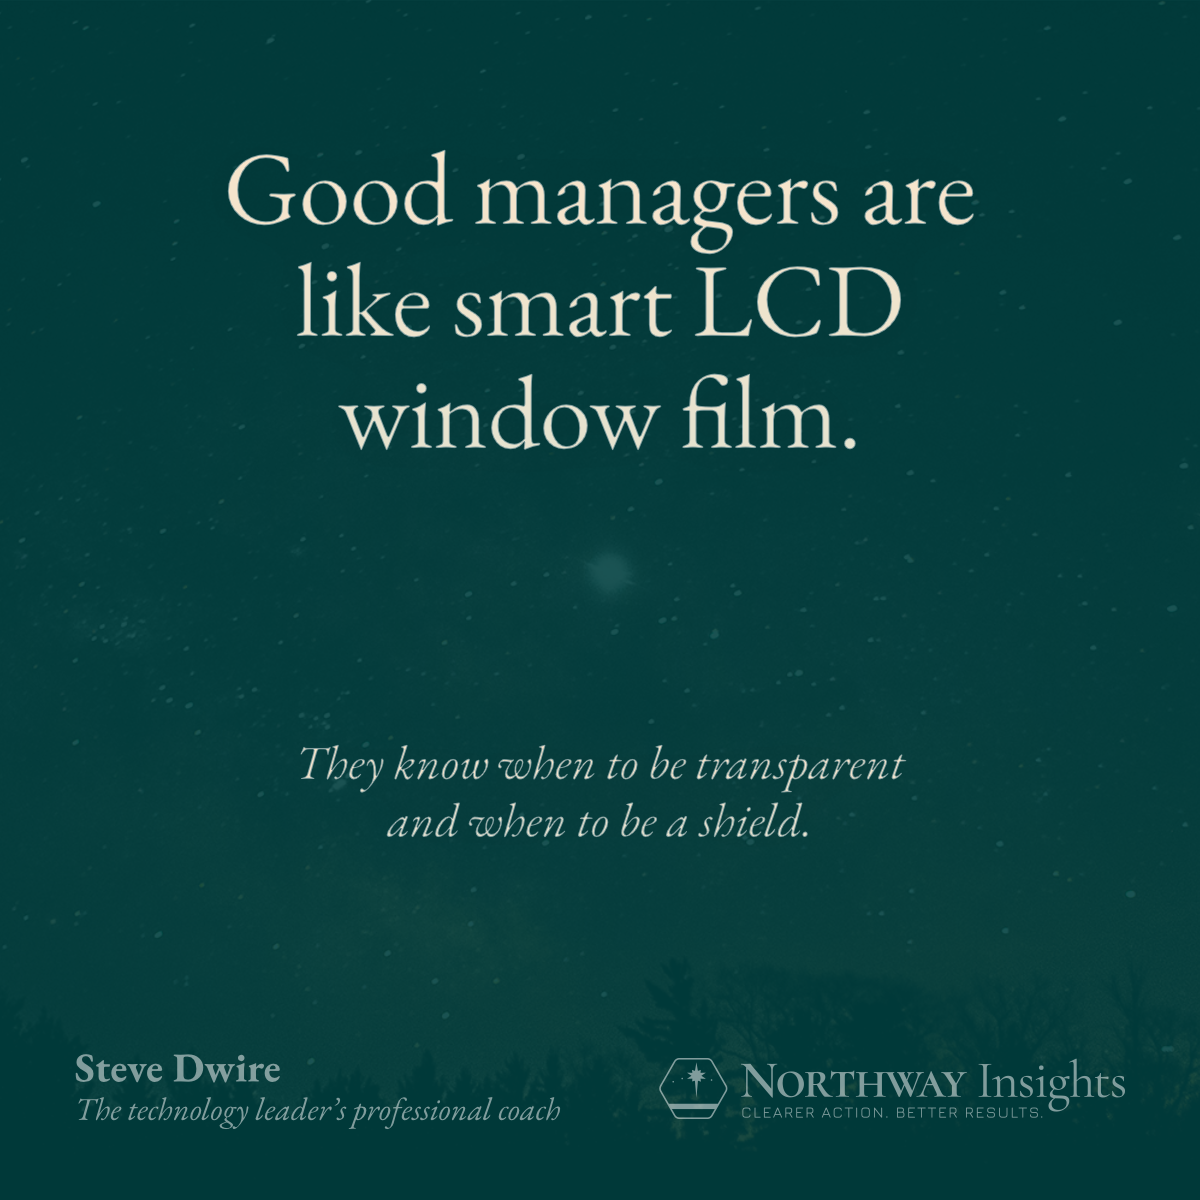 Good managers are like smart LCD film